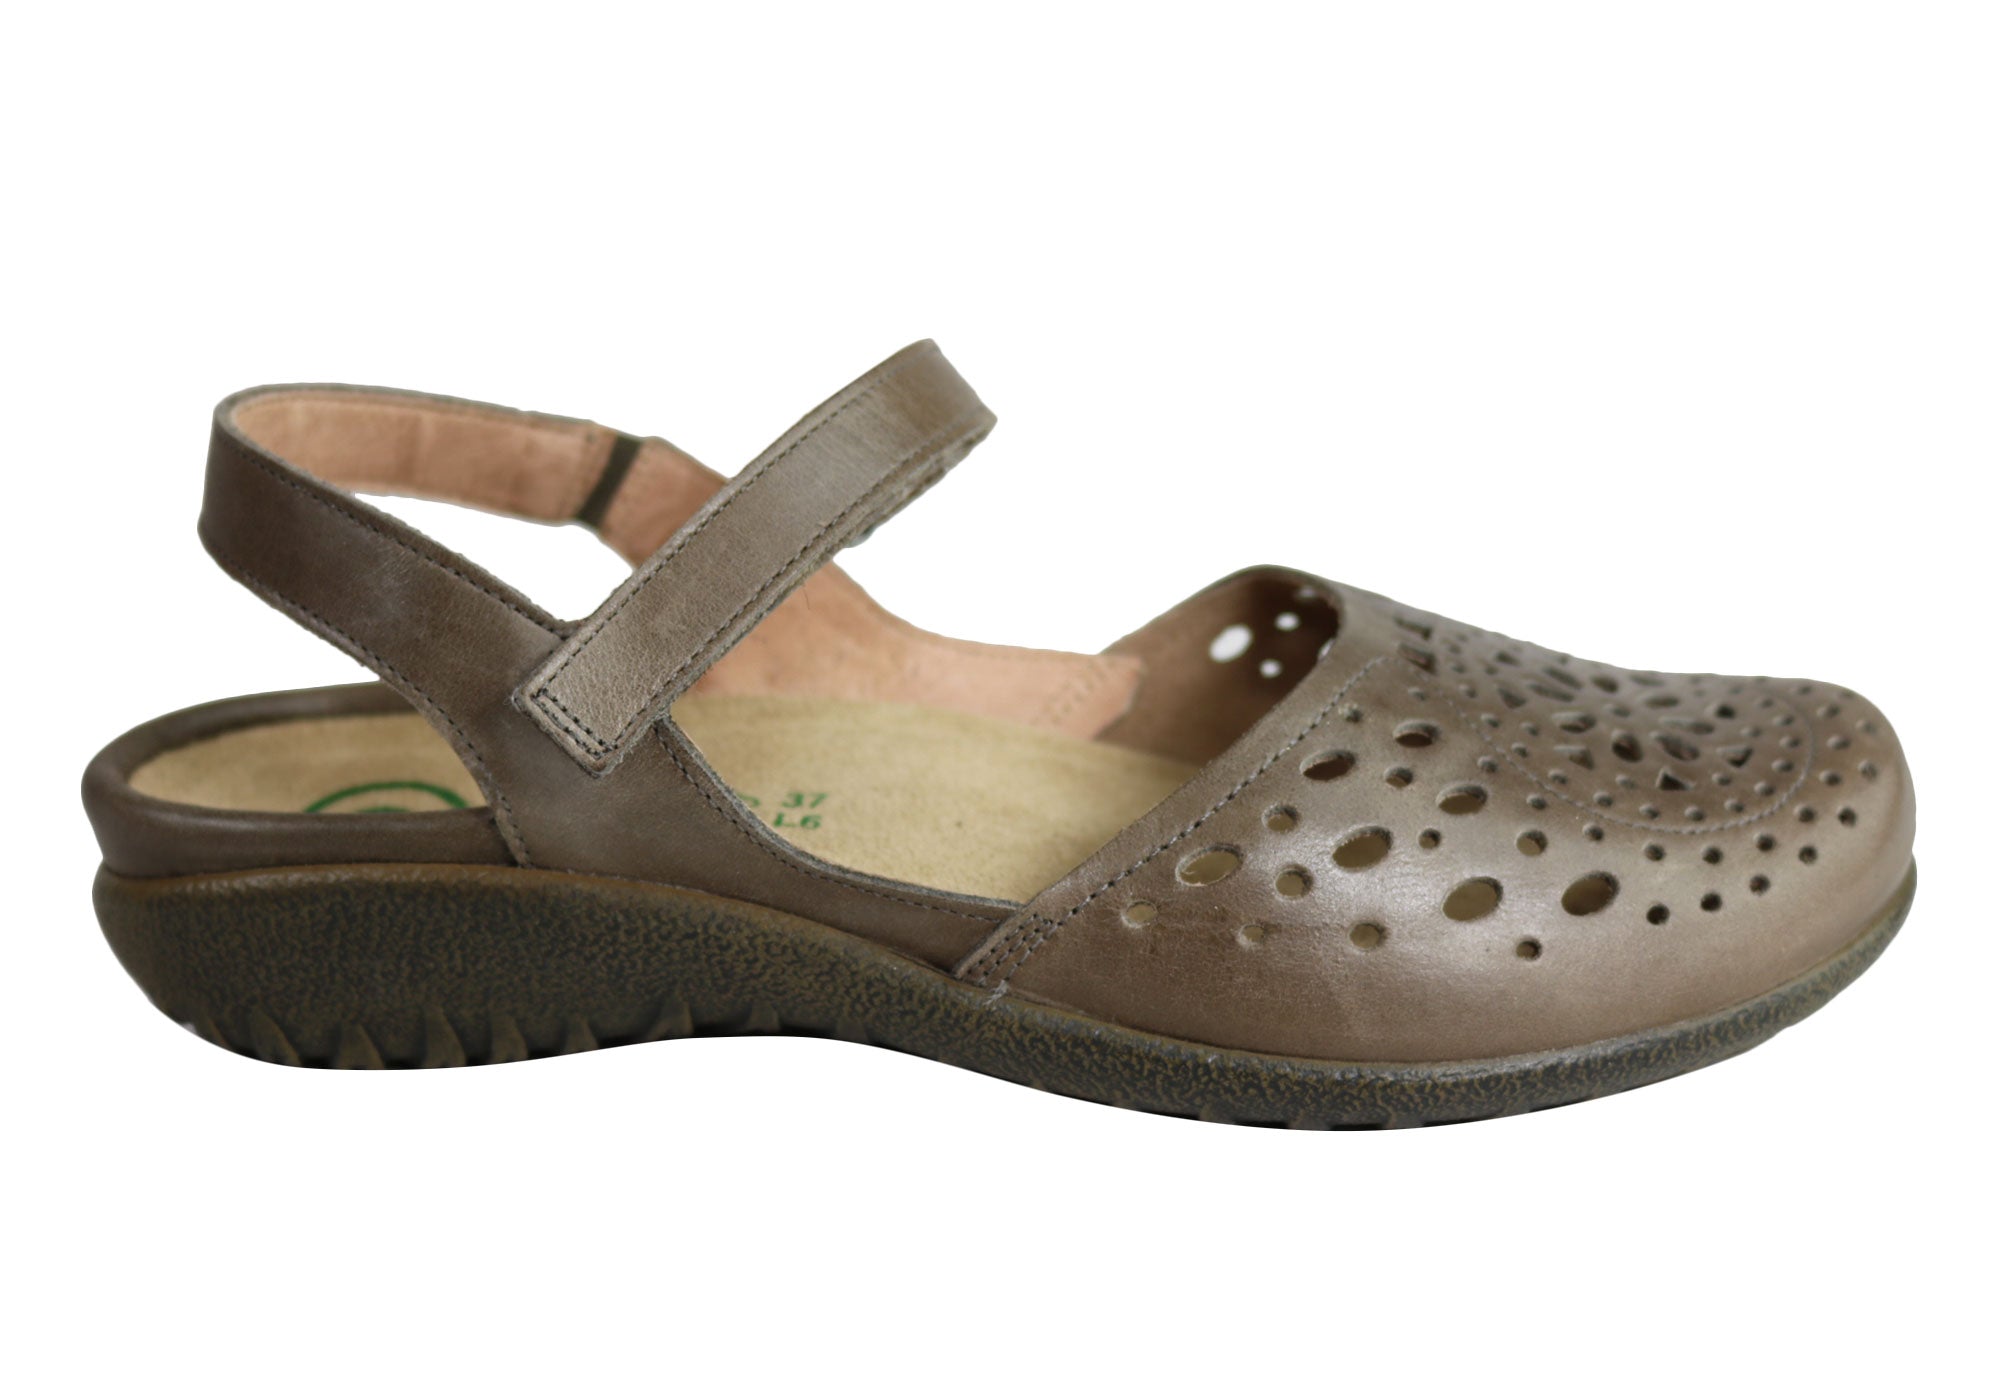 orthotic friendly women's shoes